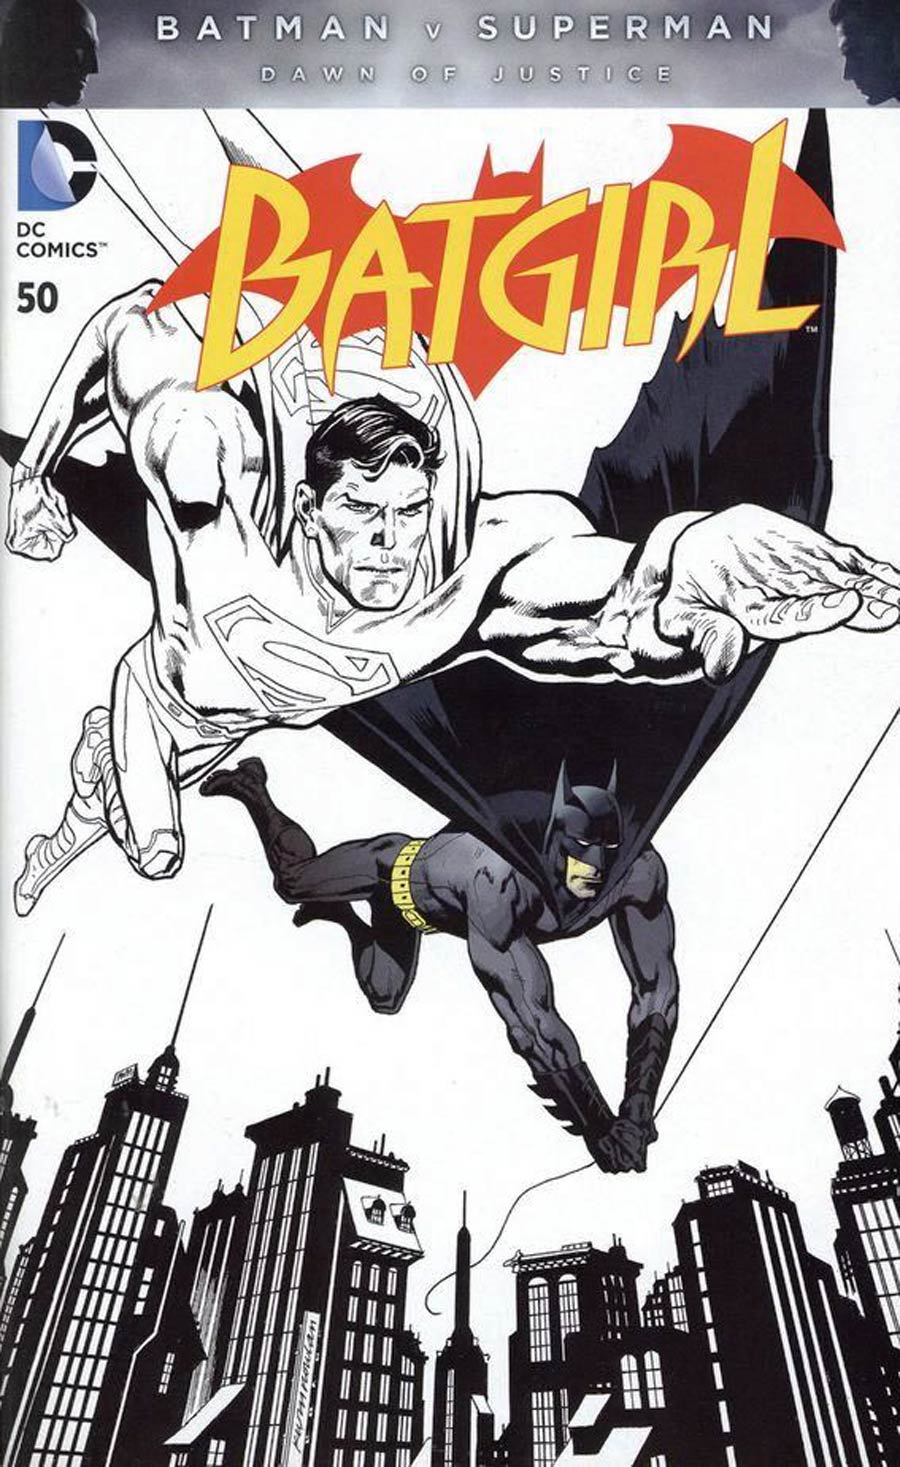 Batgirl Vol 4 #50 Cover E Variant Kevin Nowlan Batman v Superman Dawn Of Justice Superman In Black And White Cover Without Polybag